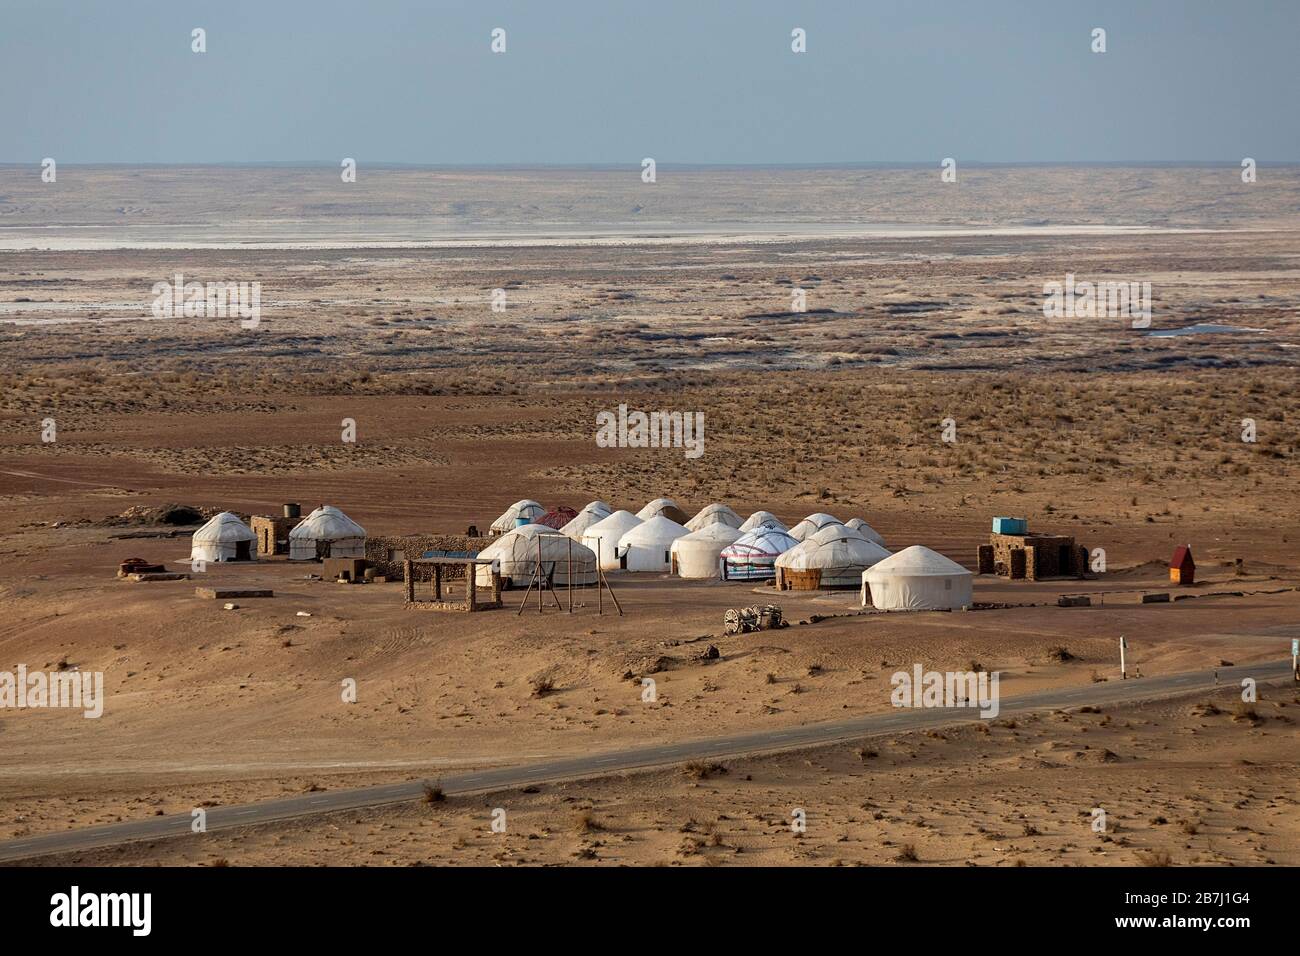 A Yurt camp at the entrance to the site of the Ayaz Kala Fort site in Uzbekistan Stock Photo